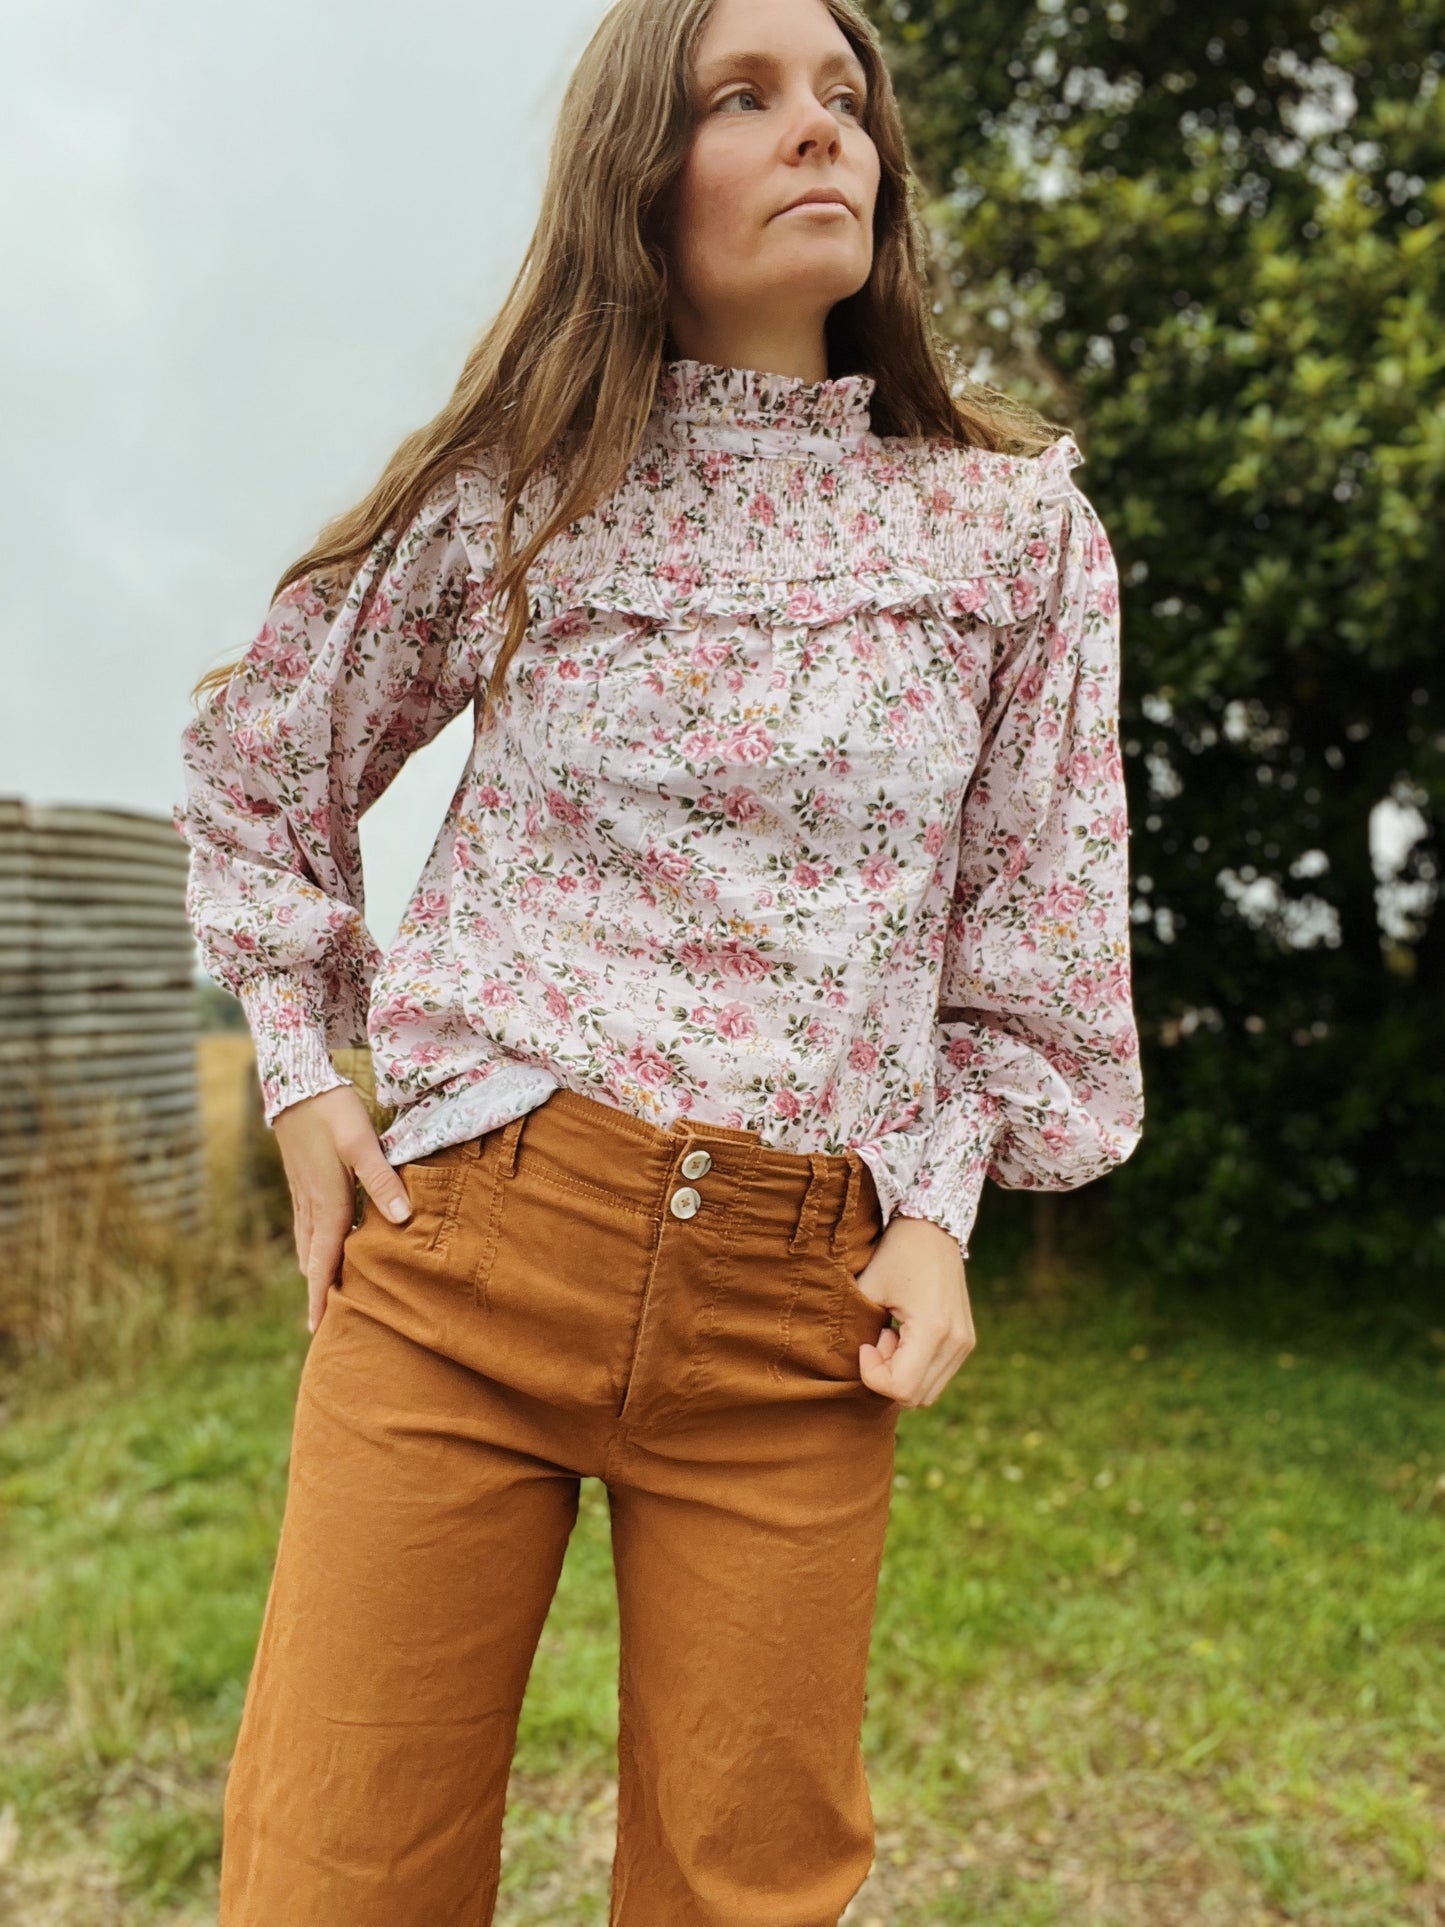 100% RECYCLED COTTON - BAMBI BLOUSE PINK ROSE FLORAL